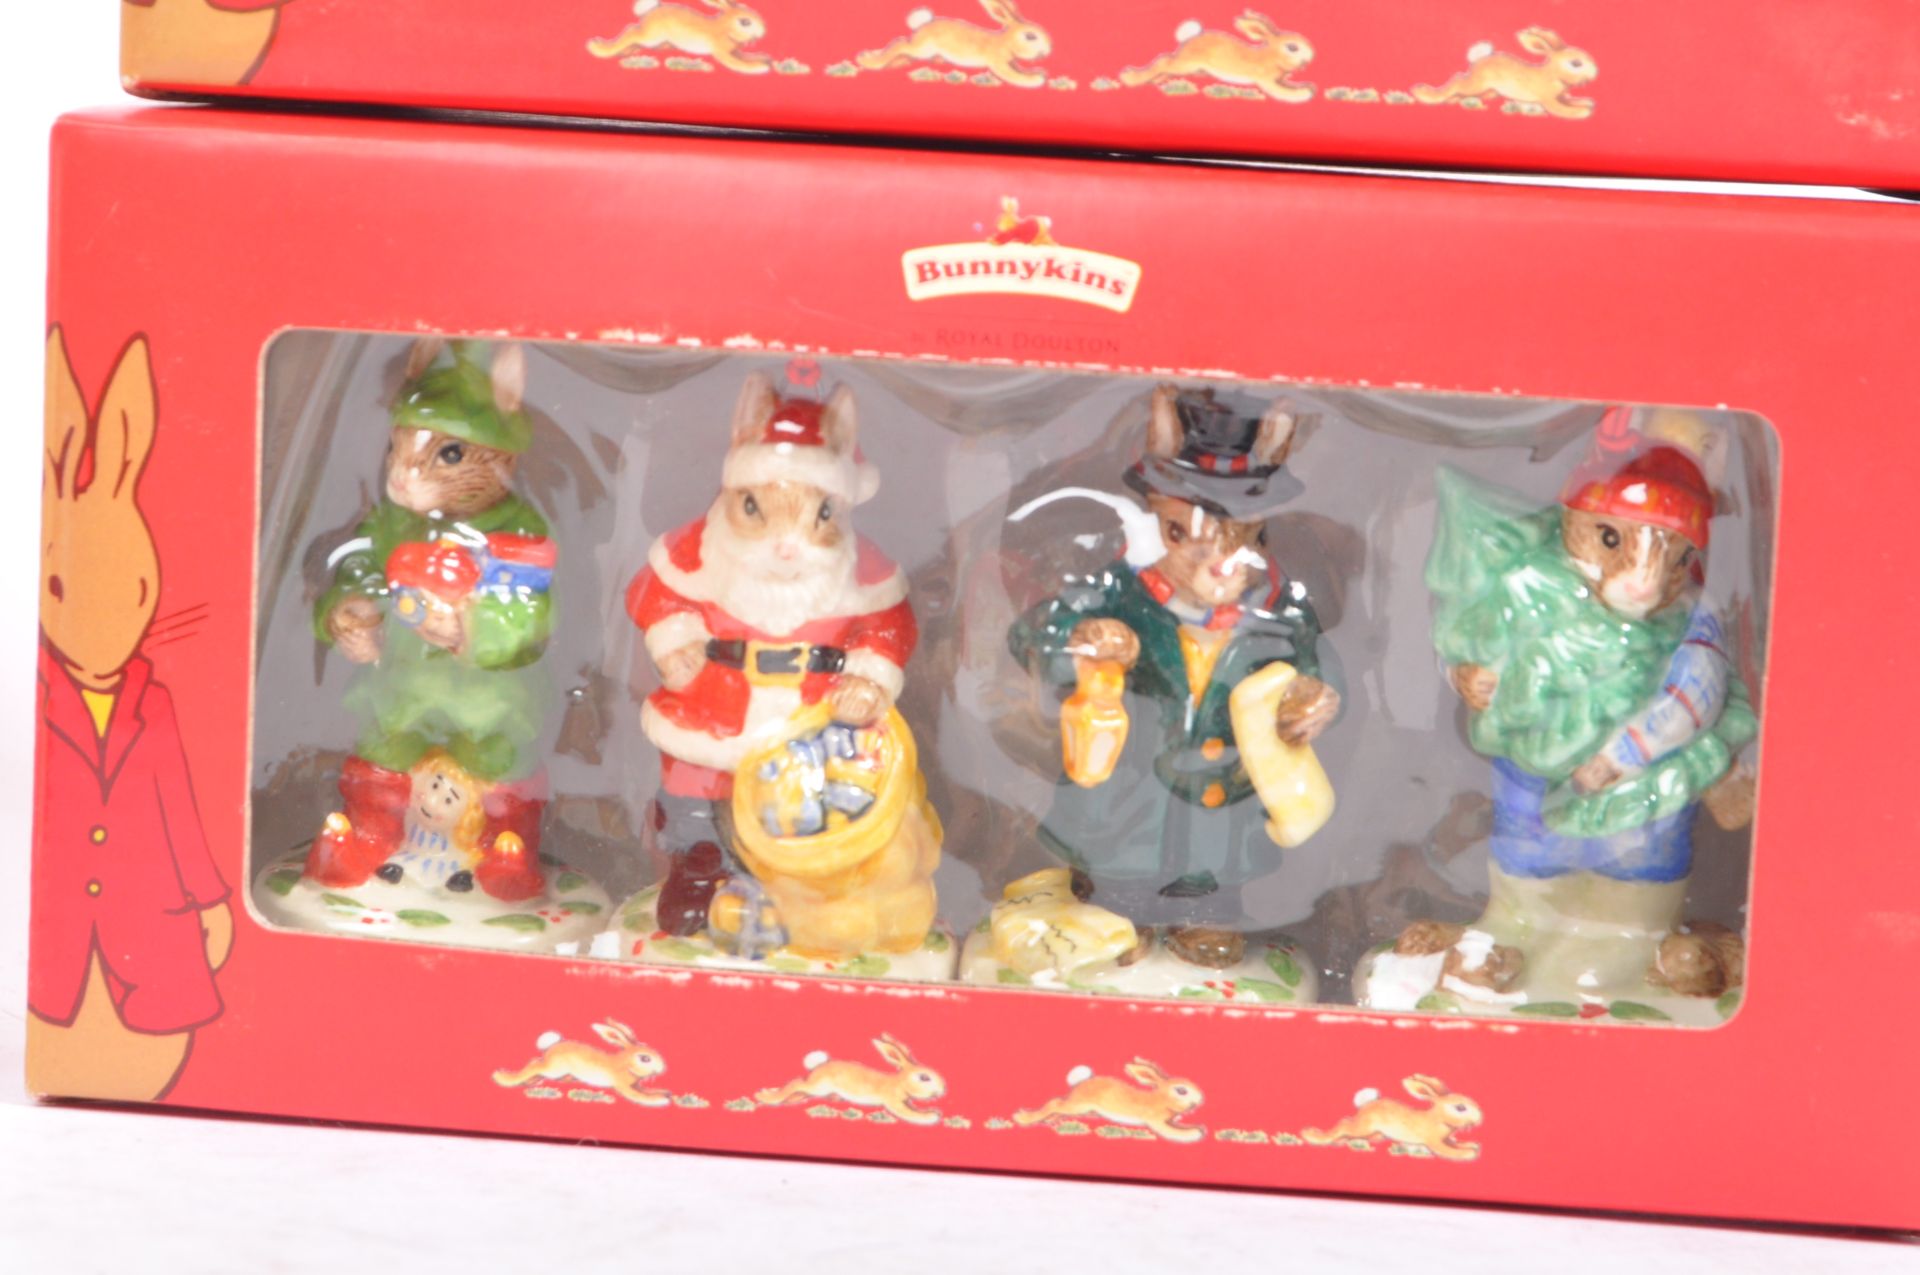 ROYAL DOULTON - BUNNYKINS - COLLECTION OF CHINA FIGURES - Image 9 of 9